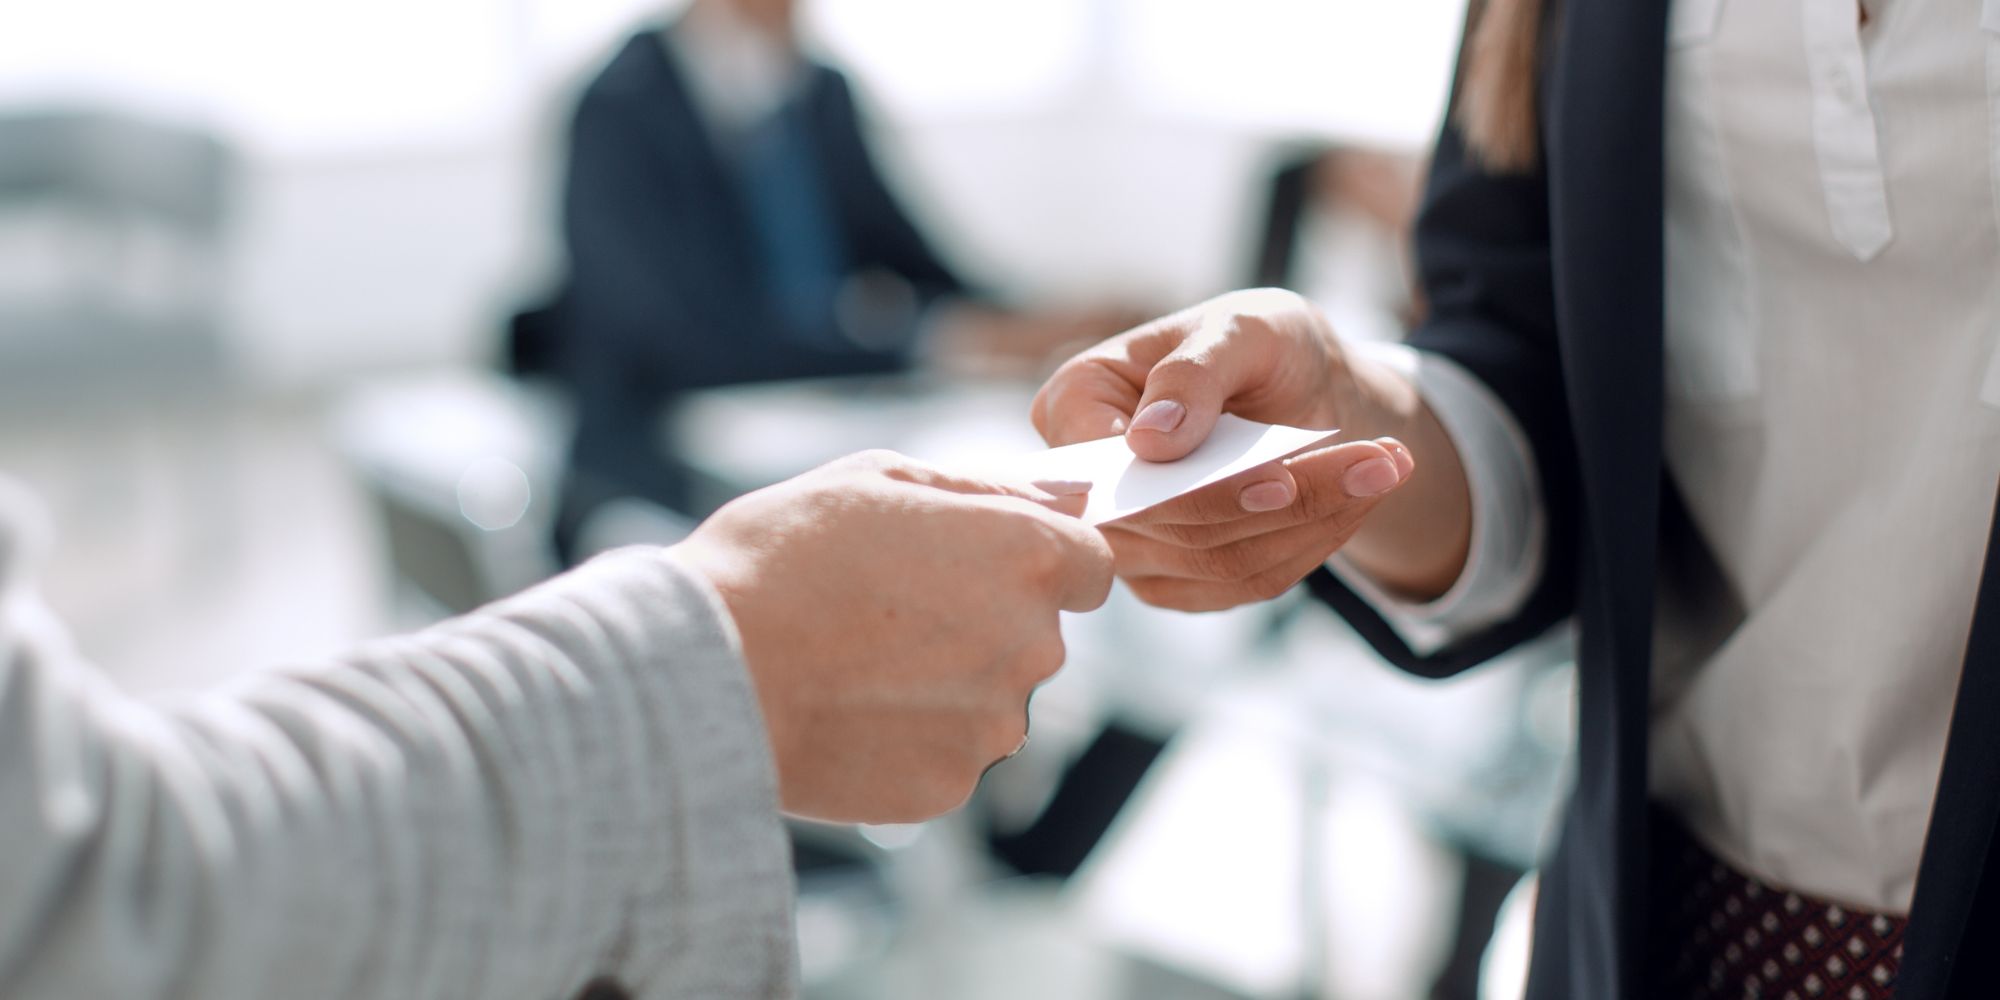 Two people exchange business cards (stock image)